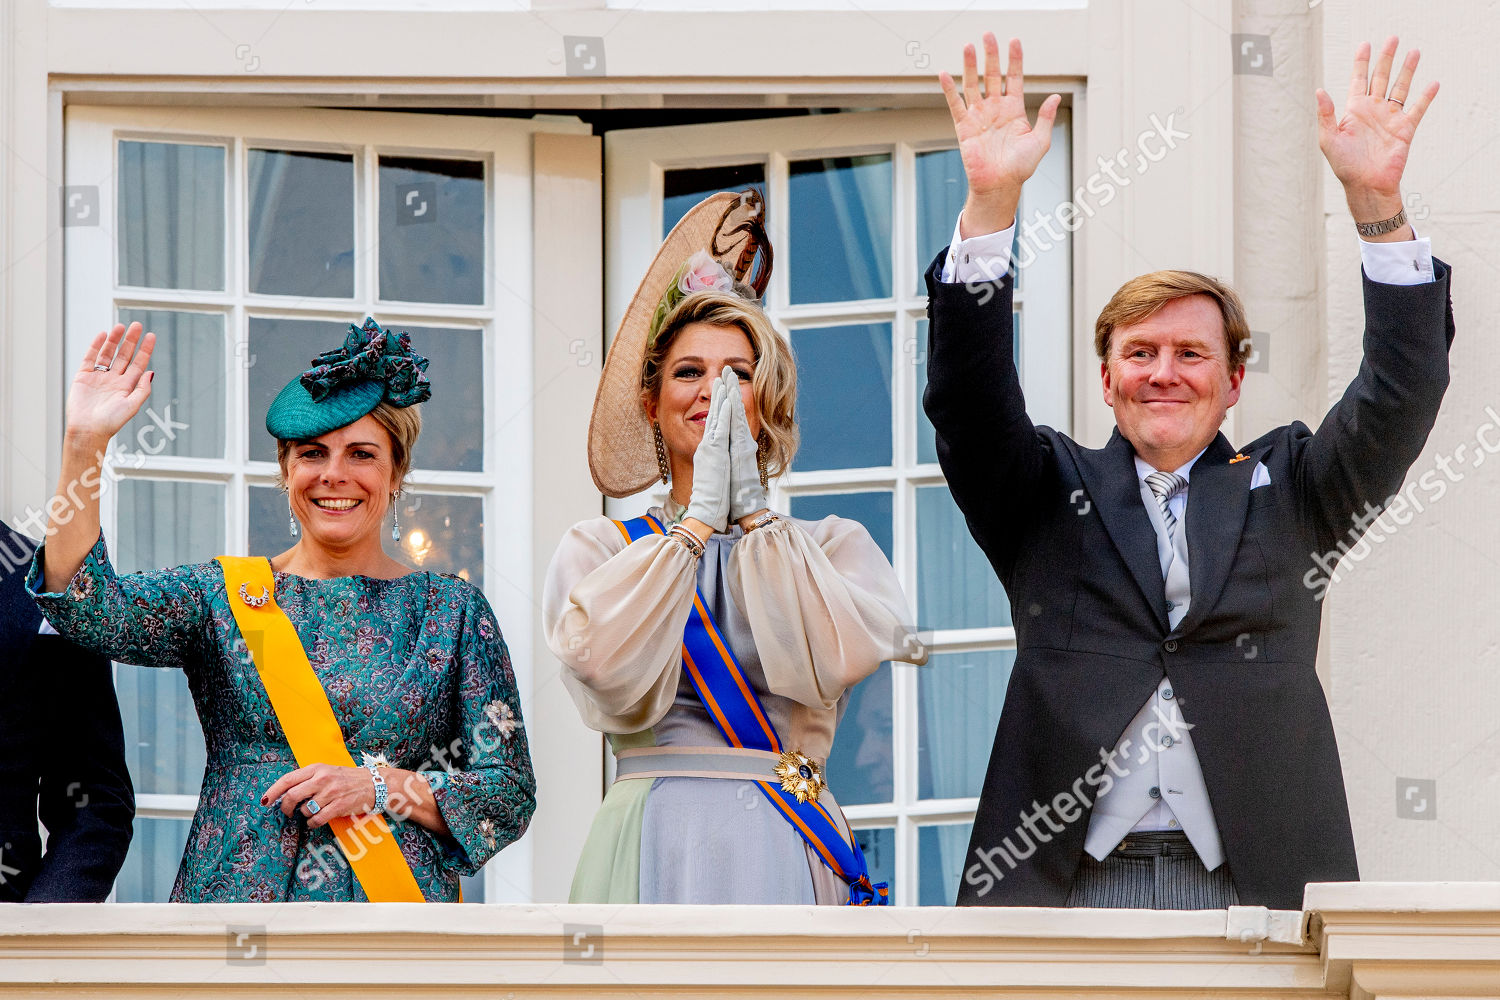 opening-of-the-parliamentary-season-the-hague-the-netherlands-shutterstock-editorial-9885898y.jpg